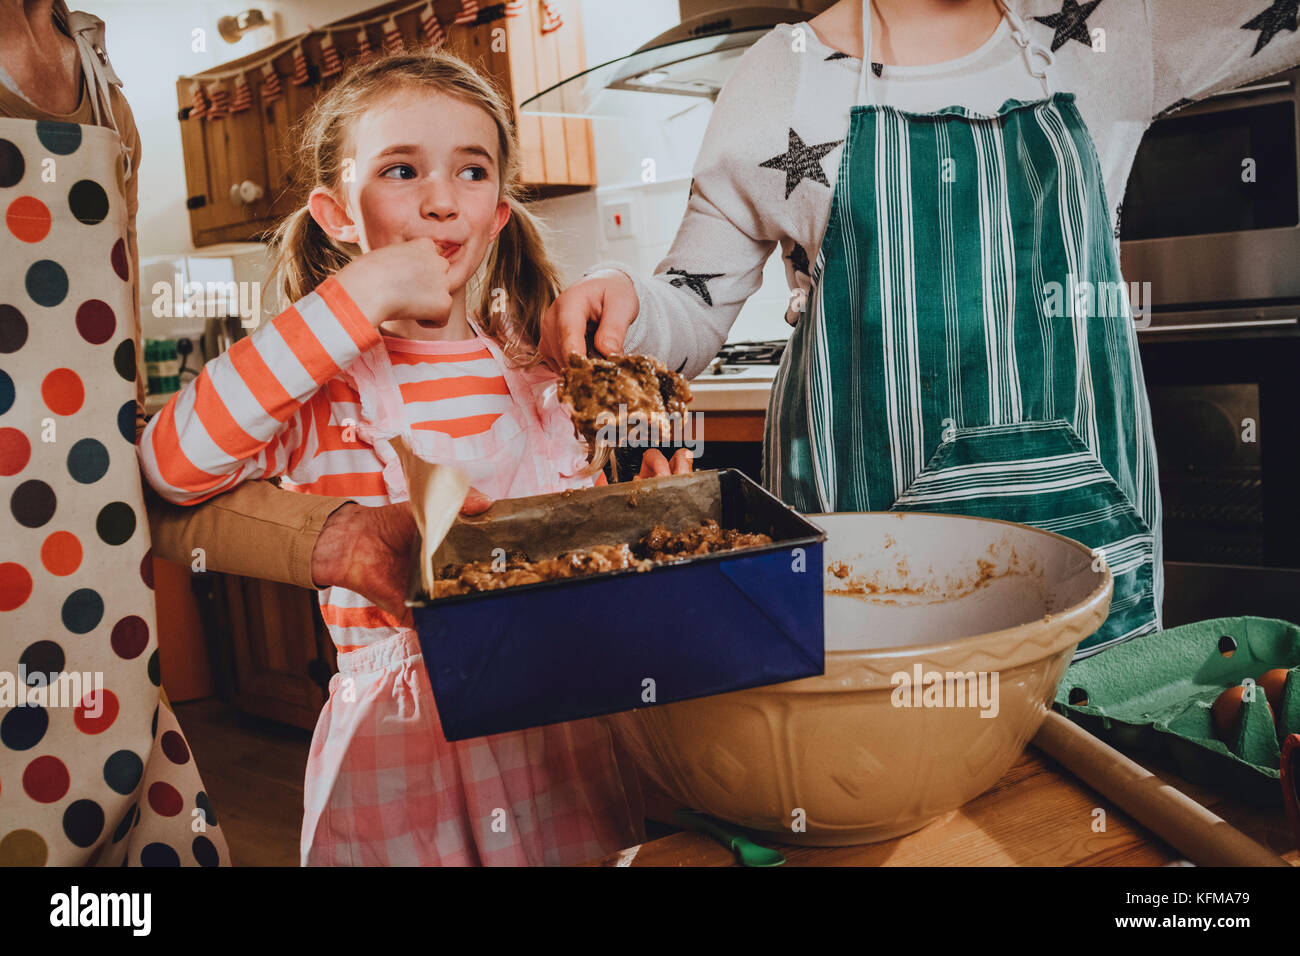 Two sisters are baking cakes with their grandmother. The youngest girl is cheekily tasting some of the cake mix on her finger. Stock Photo